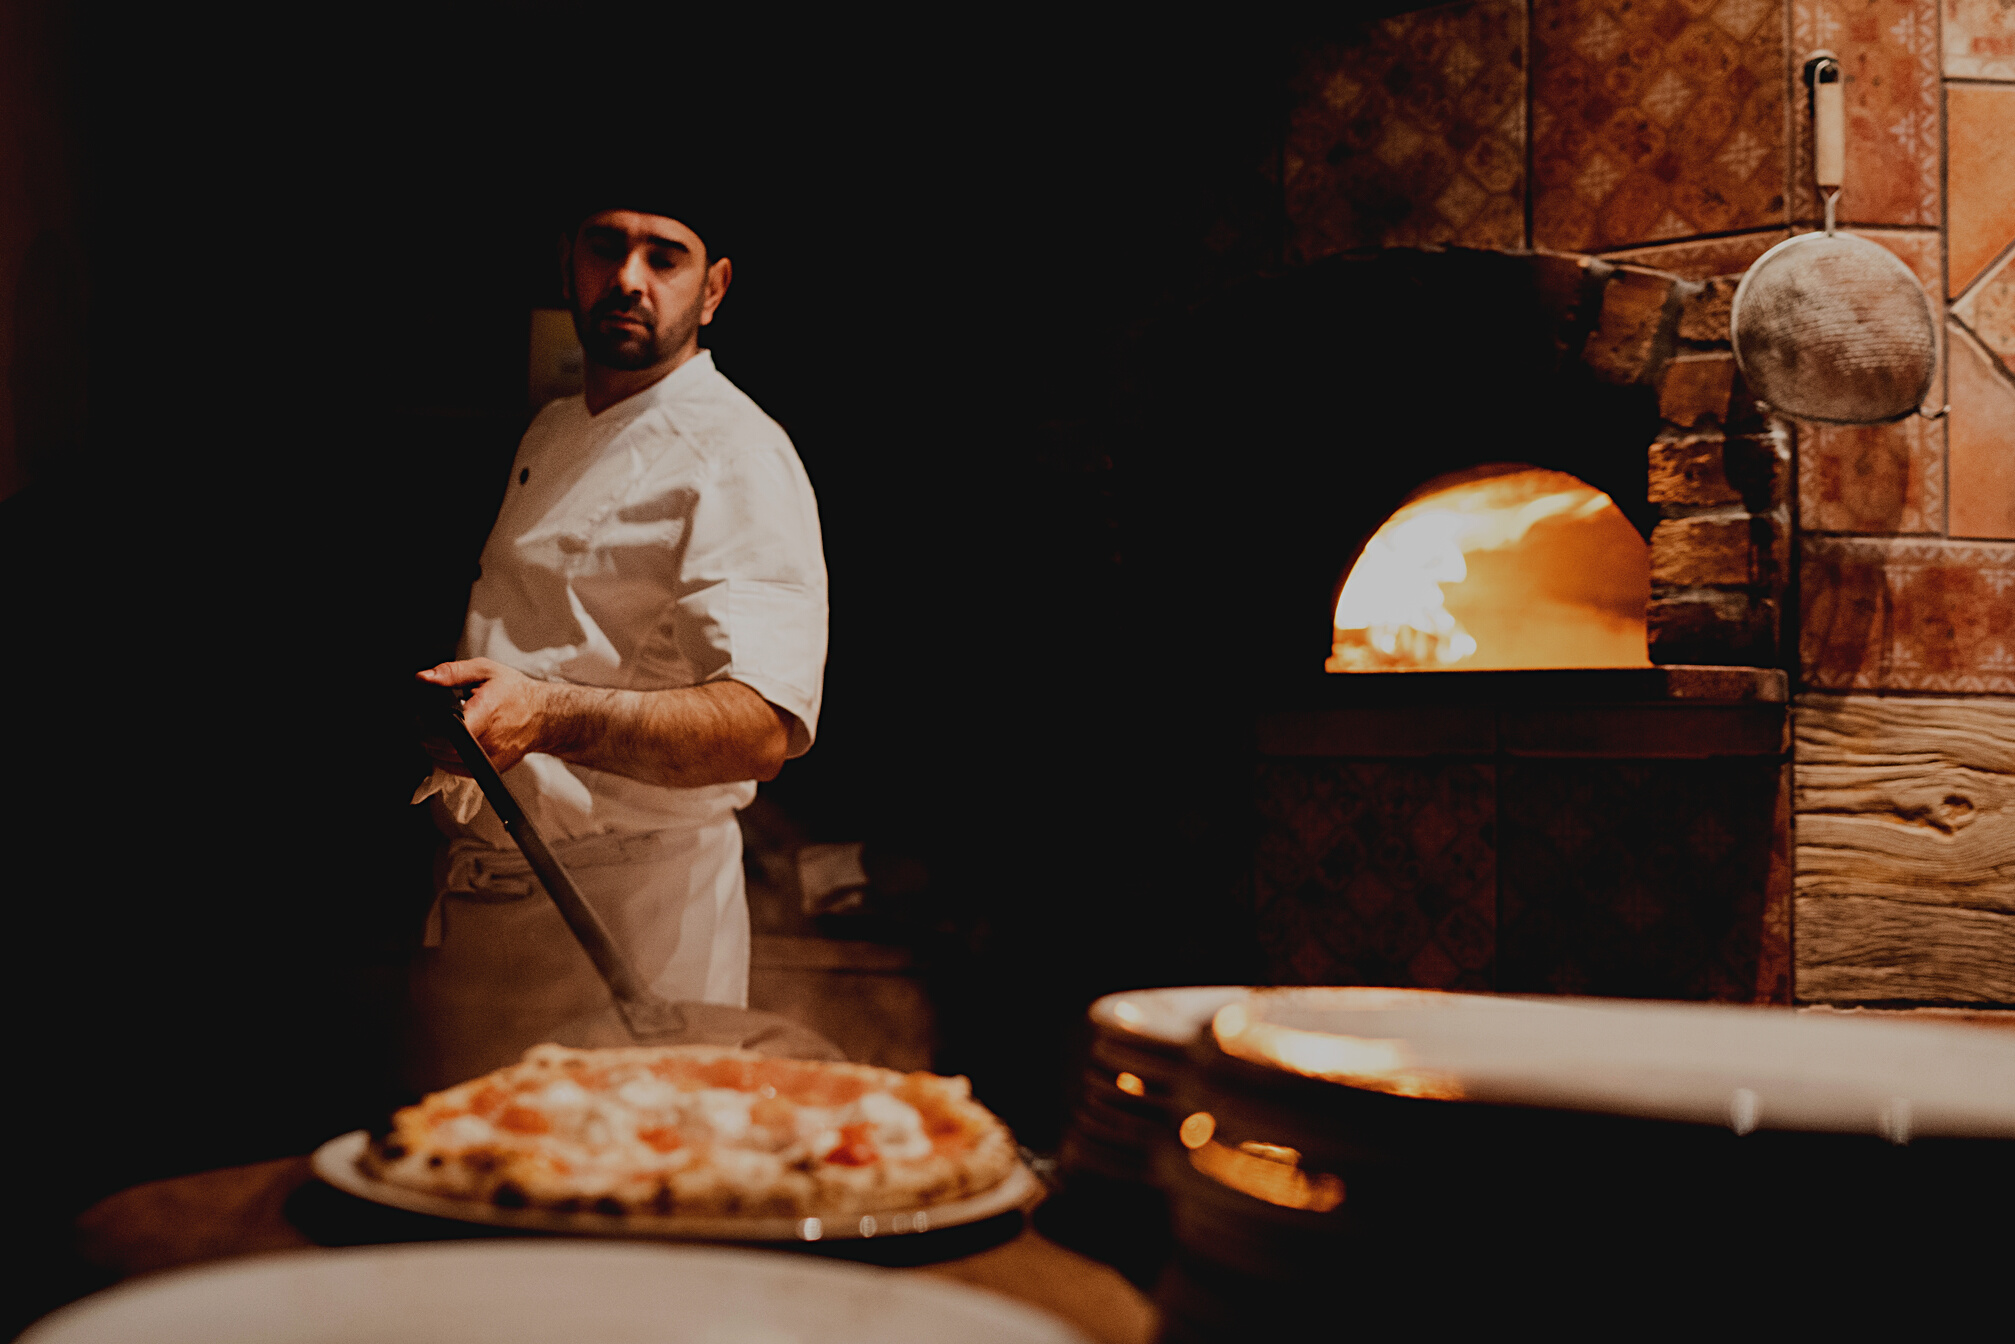 Pizza maker plating a freshly baked Neapolitan pizza with a peel